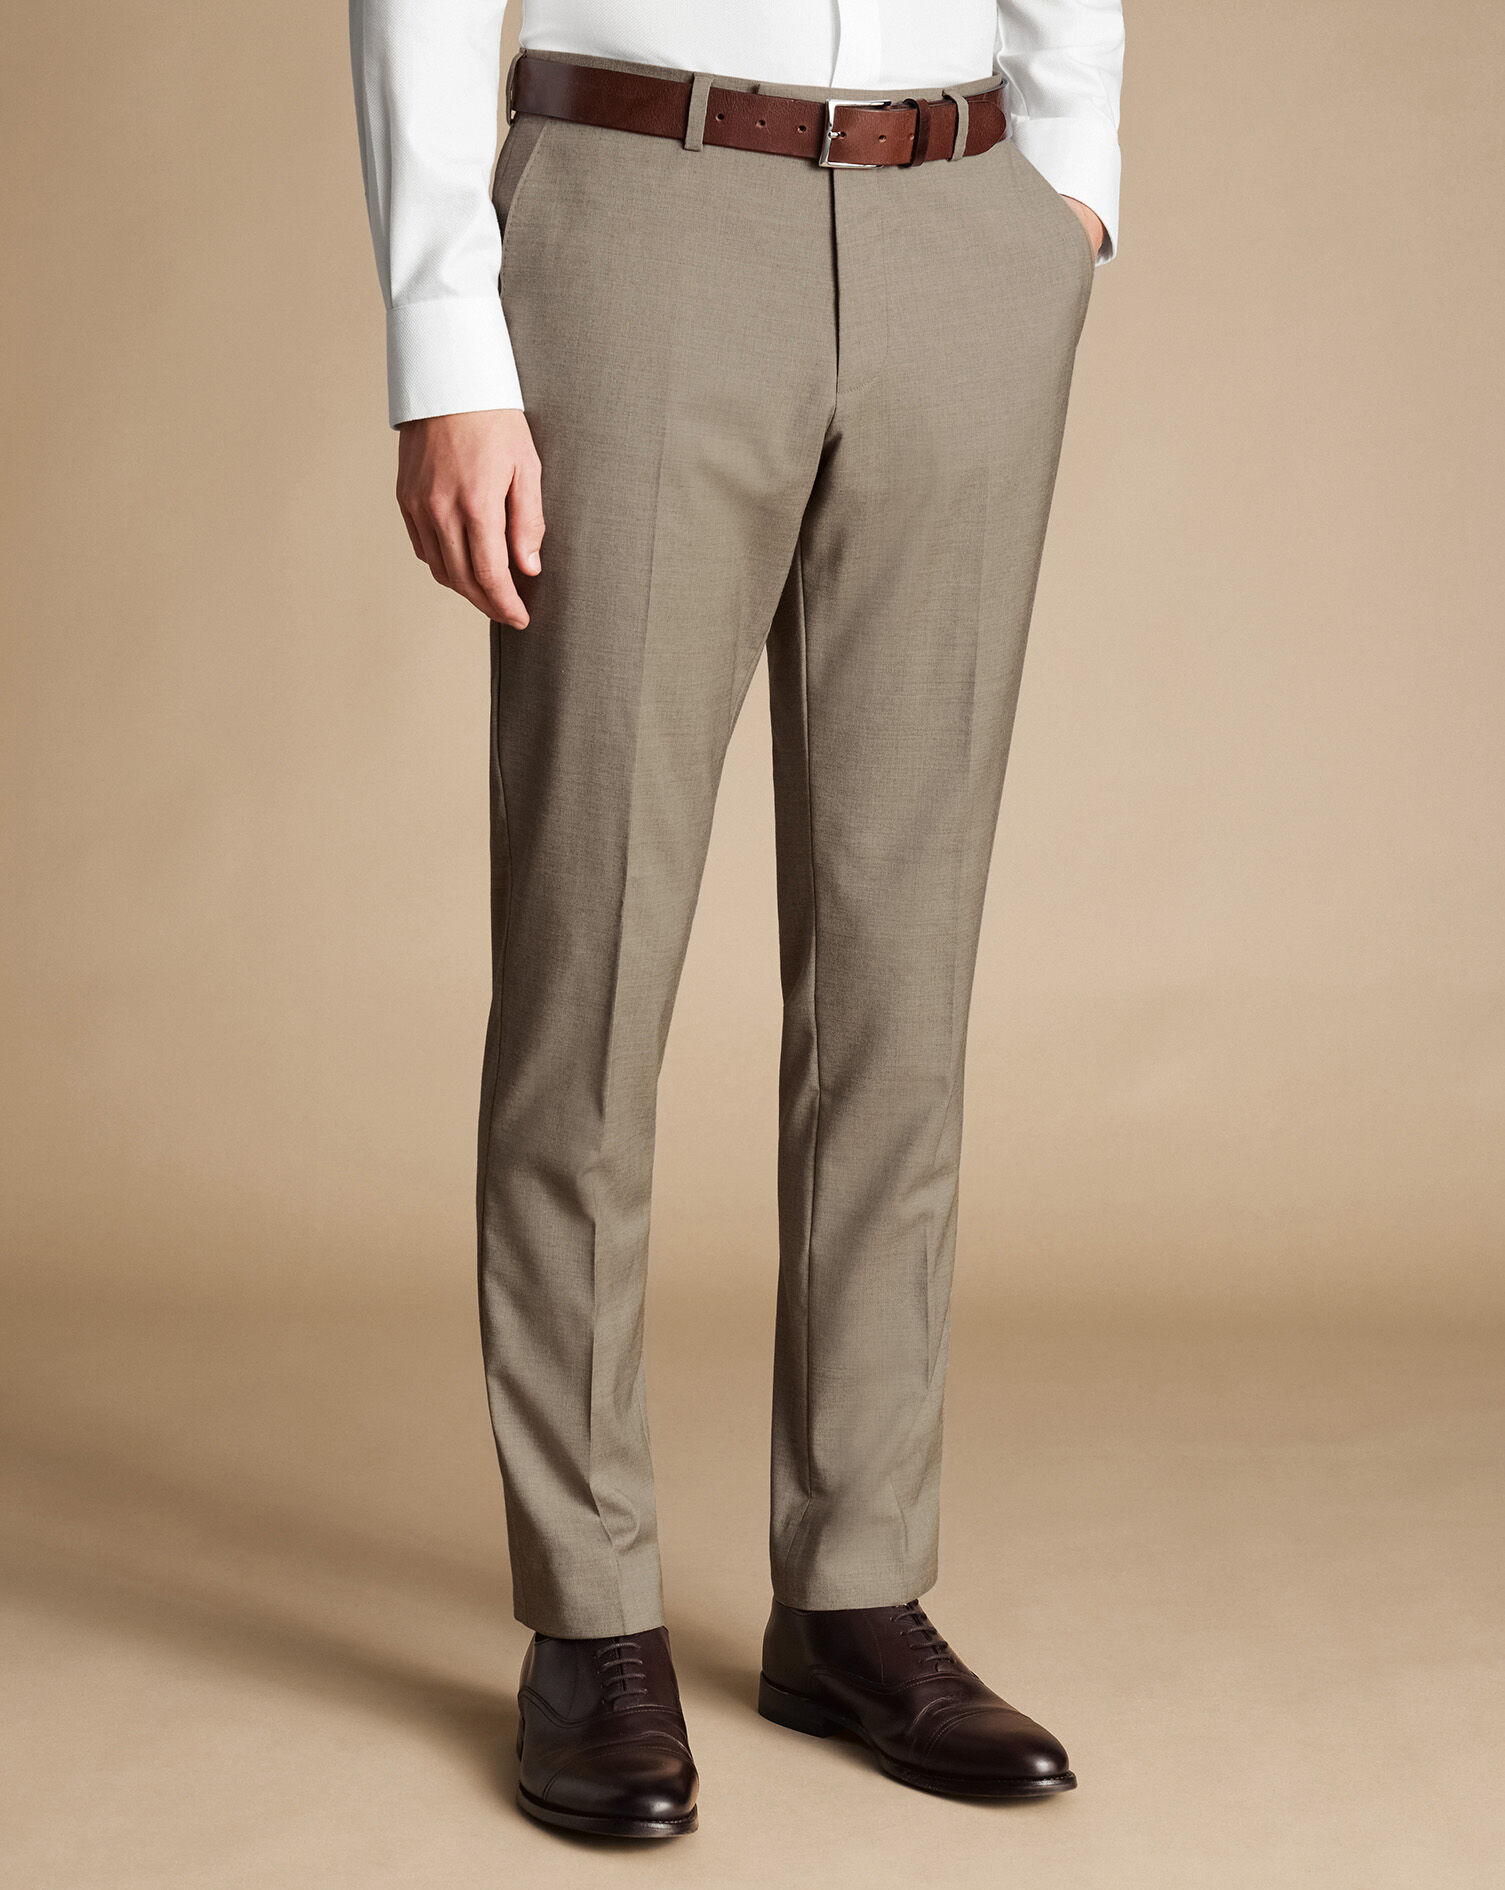 Tuxedo Pants BLACK All Wool NON PLEATED Trousers - Tuxedos Online